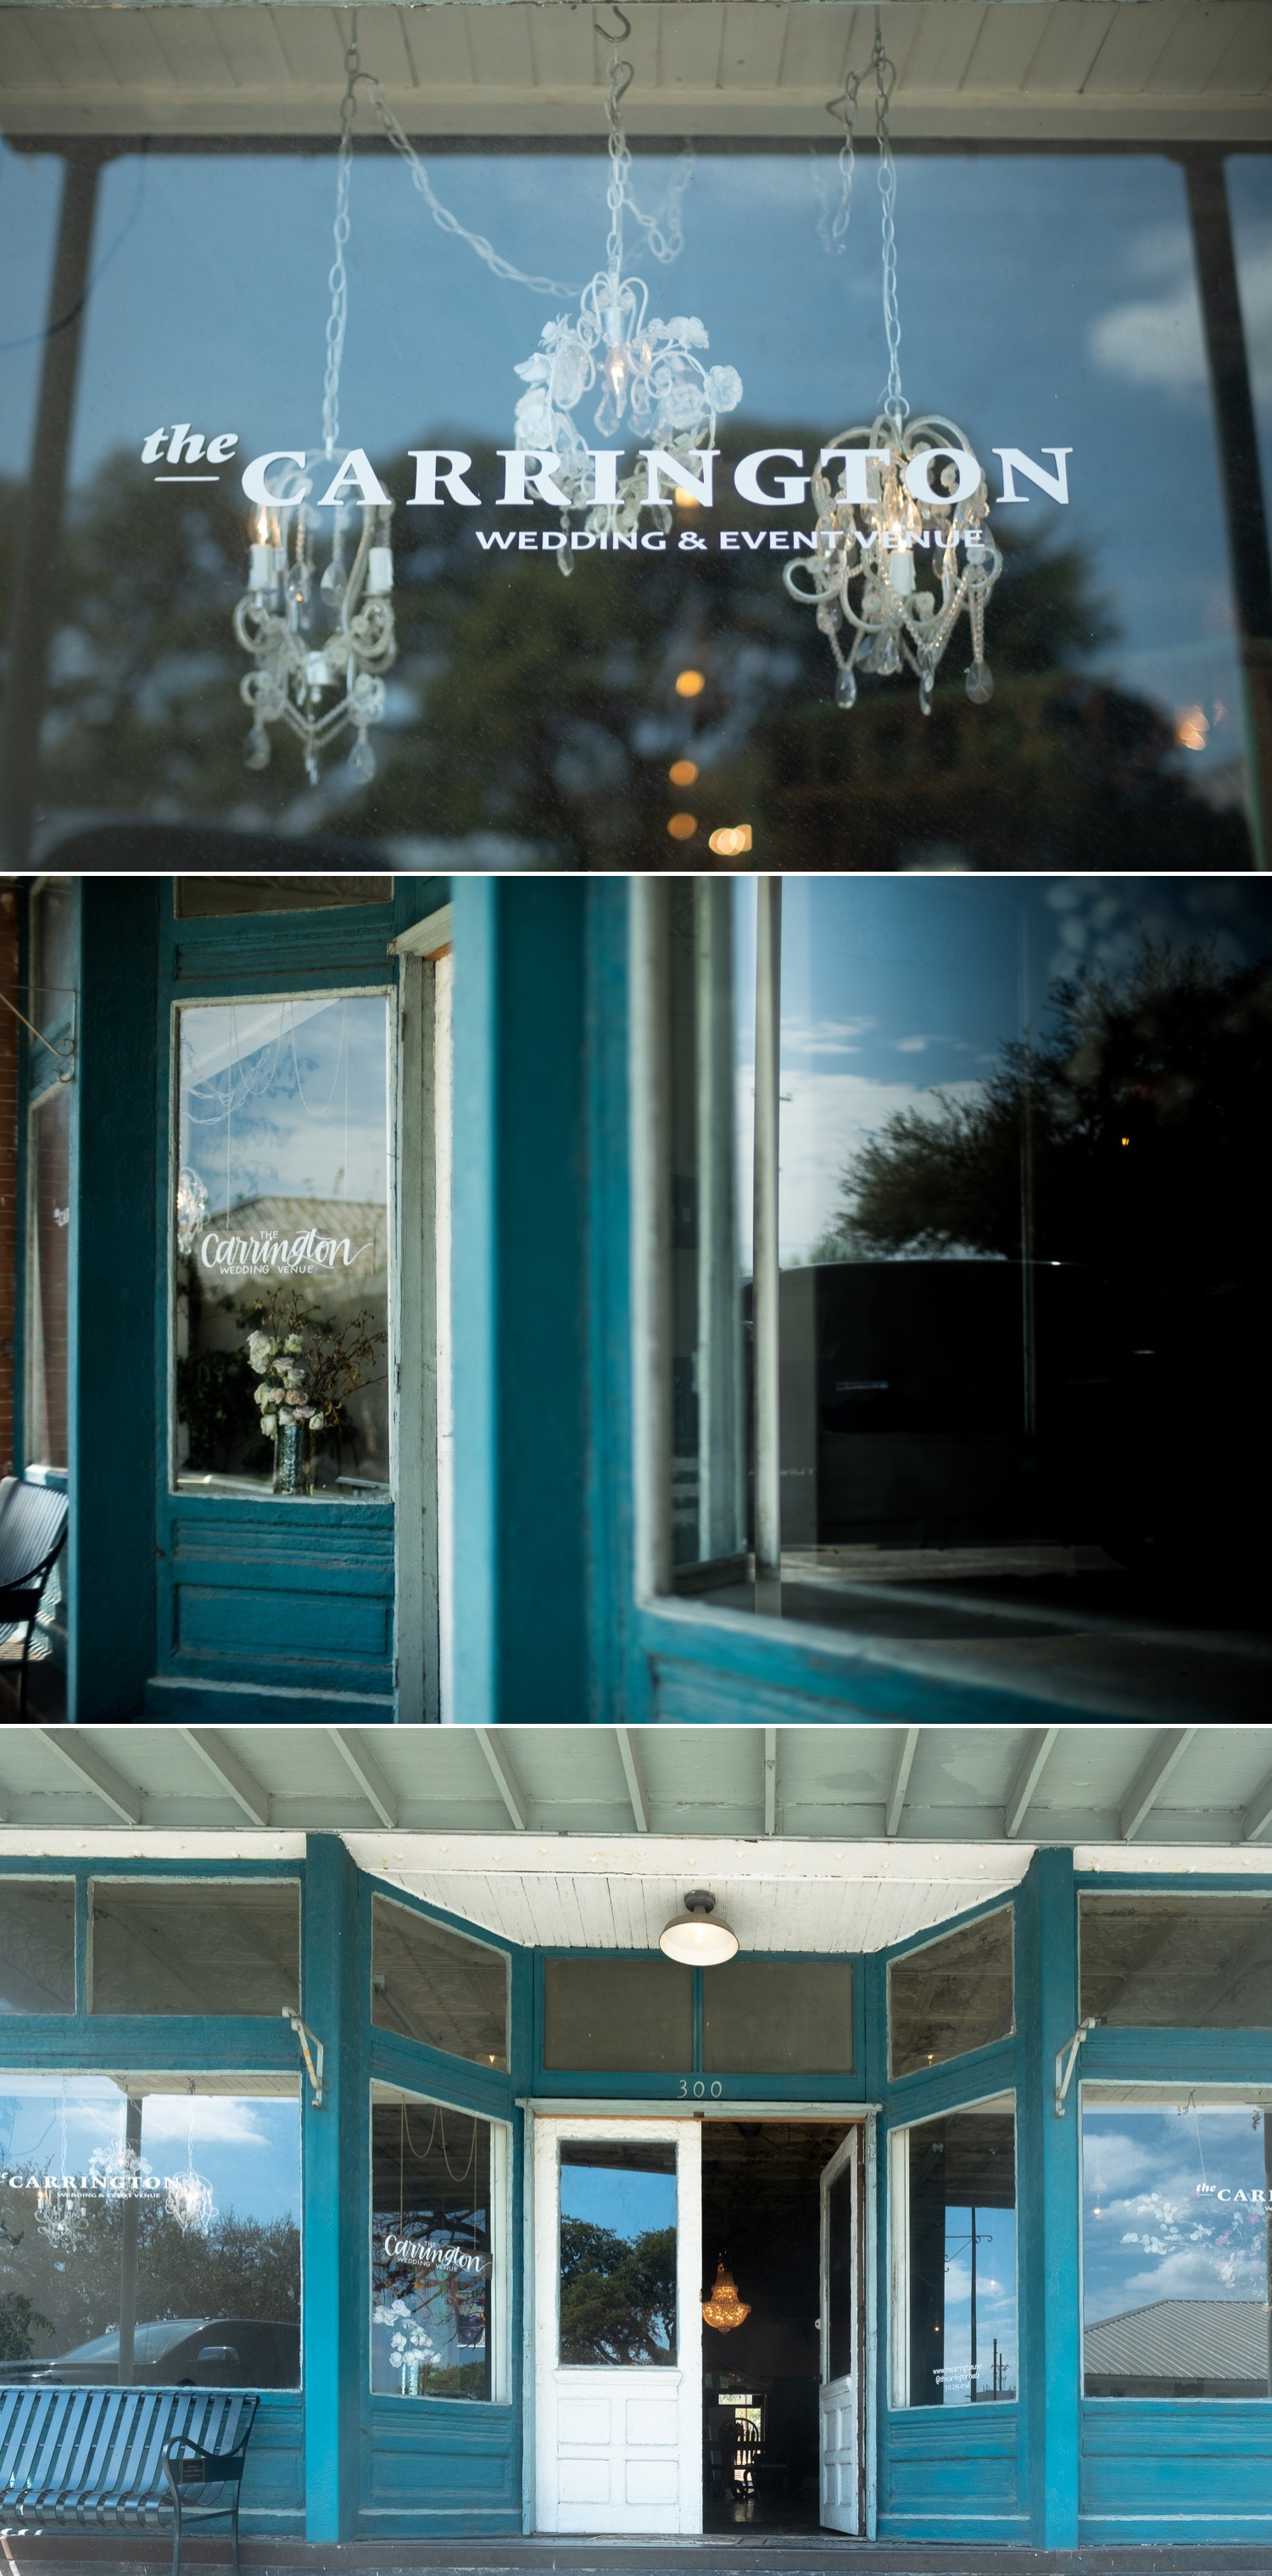 The windows welcoming guests to the Carrington Wedding and Event Venue in Buda, Texas | Mercedes Morgan Photography, Austin wedding photographers